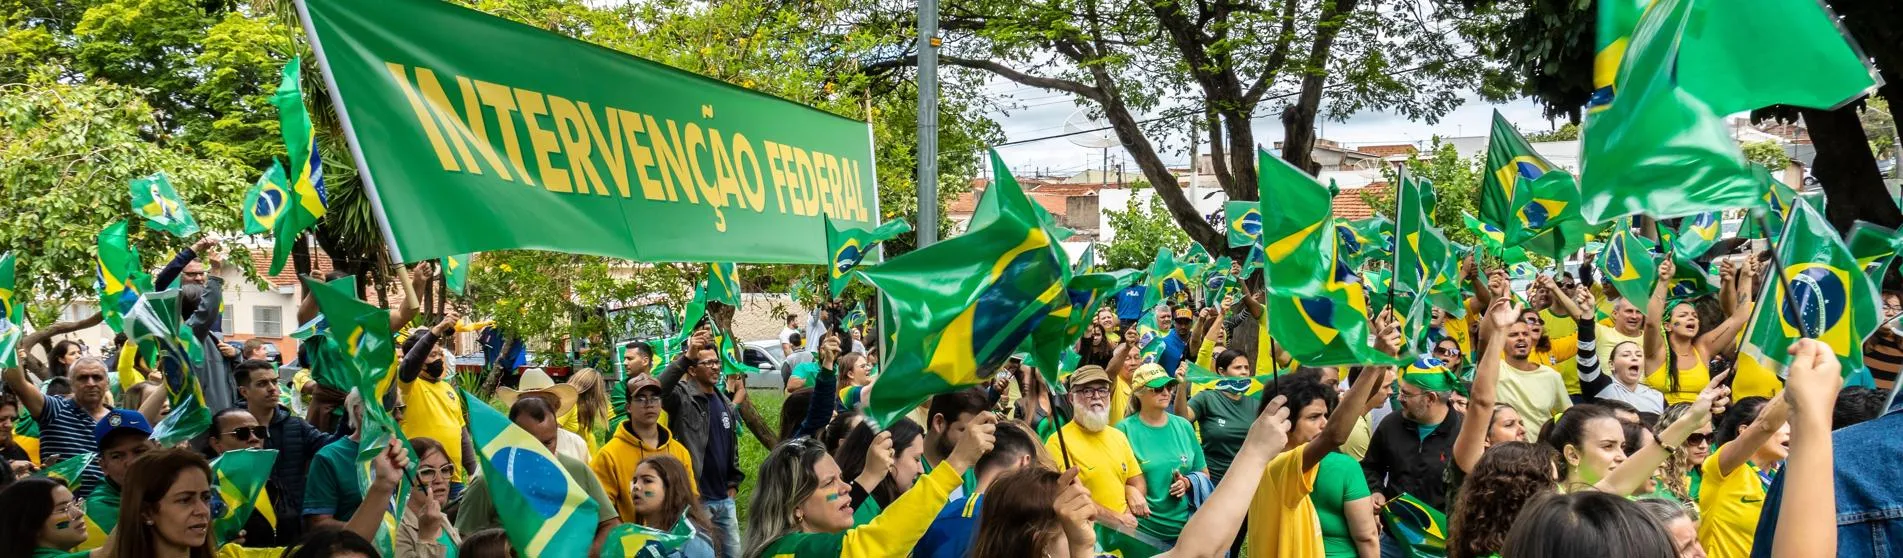 Supporters of Jair Bolsonaro demand for Federal Intervention against the democratic election of Lula, in front of the Barracks of War Shooting in Marília, Sao Paulo in November 2022. 